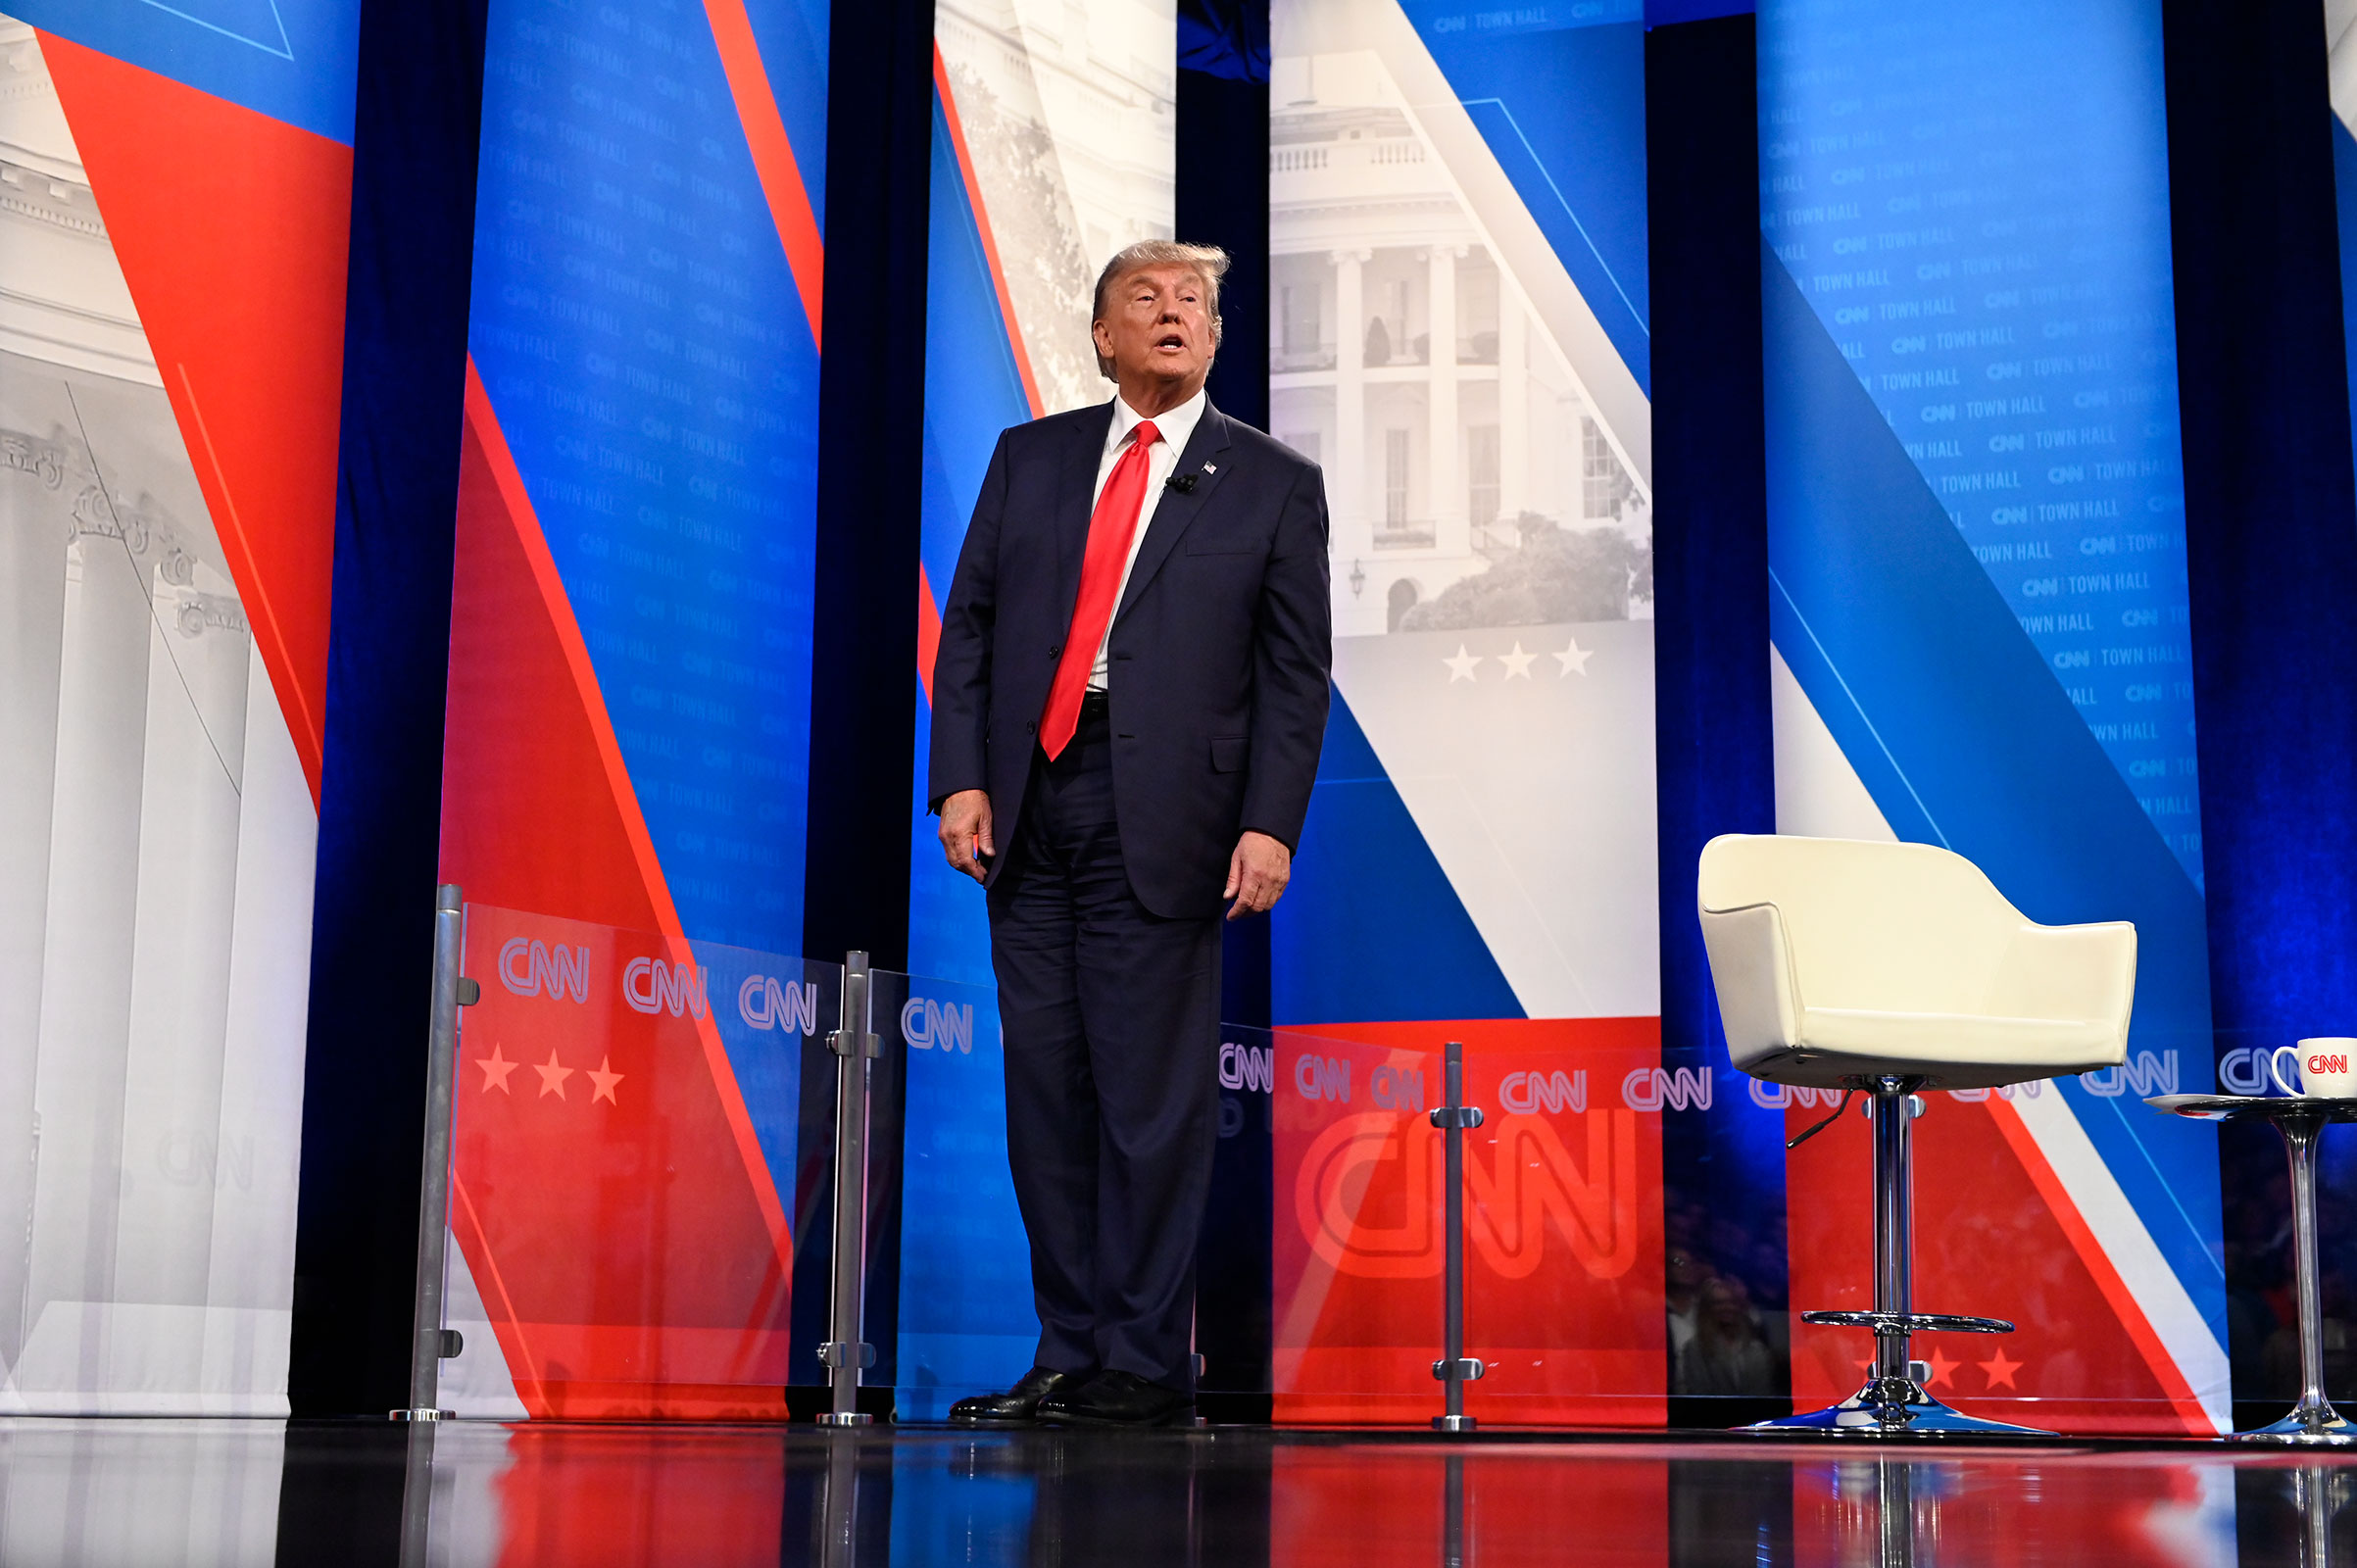 Former President Donald Trump participates in a CNN Republican Town Hall moderated by CNN’s Kaitlan Collins at St. Anselm College in Manchester, New Hampshire, on Wednesday, May 10, 2023.